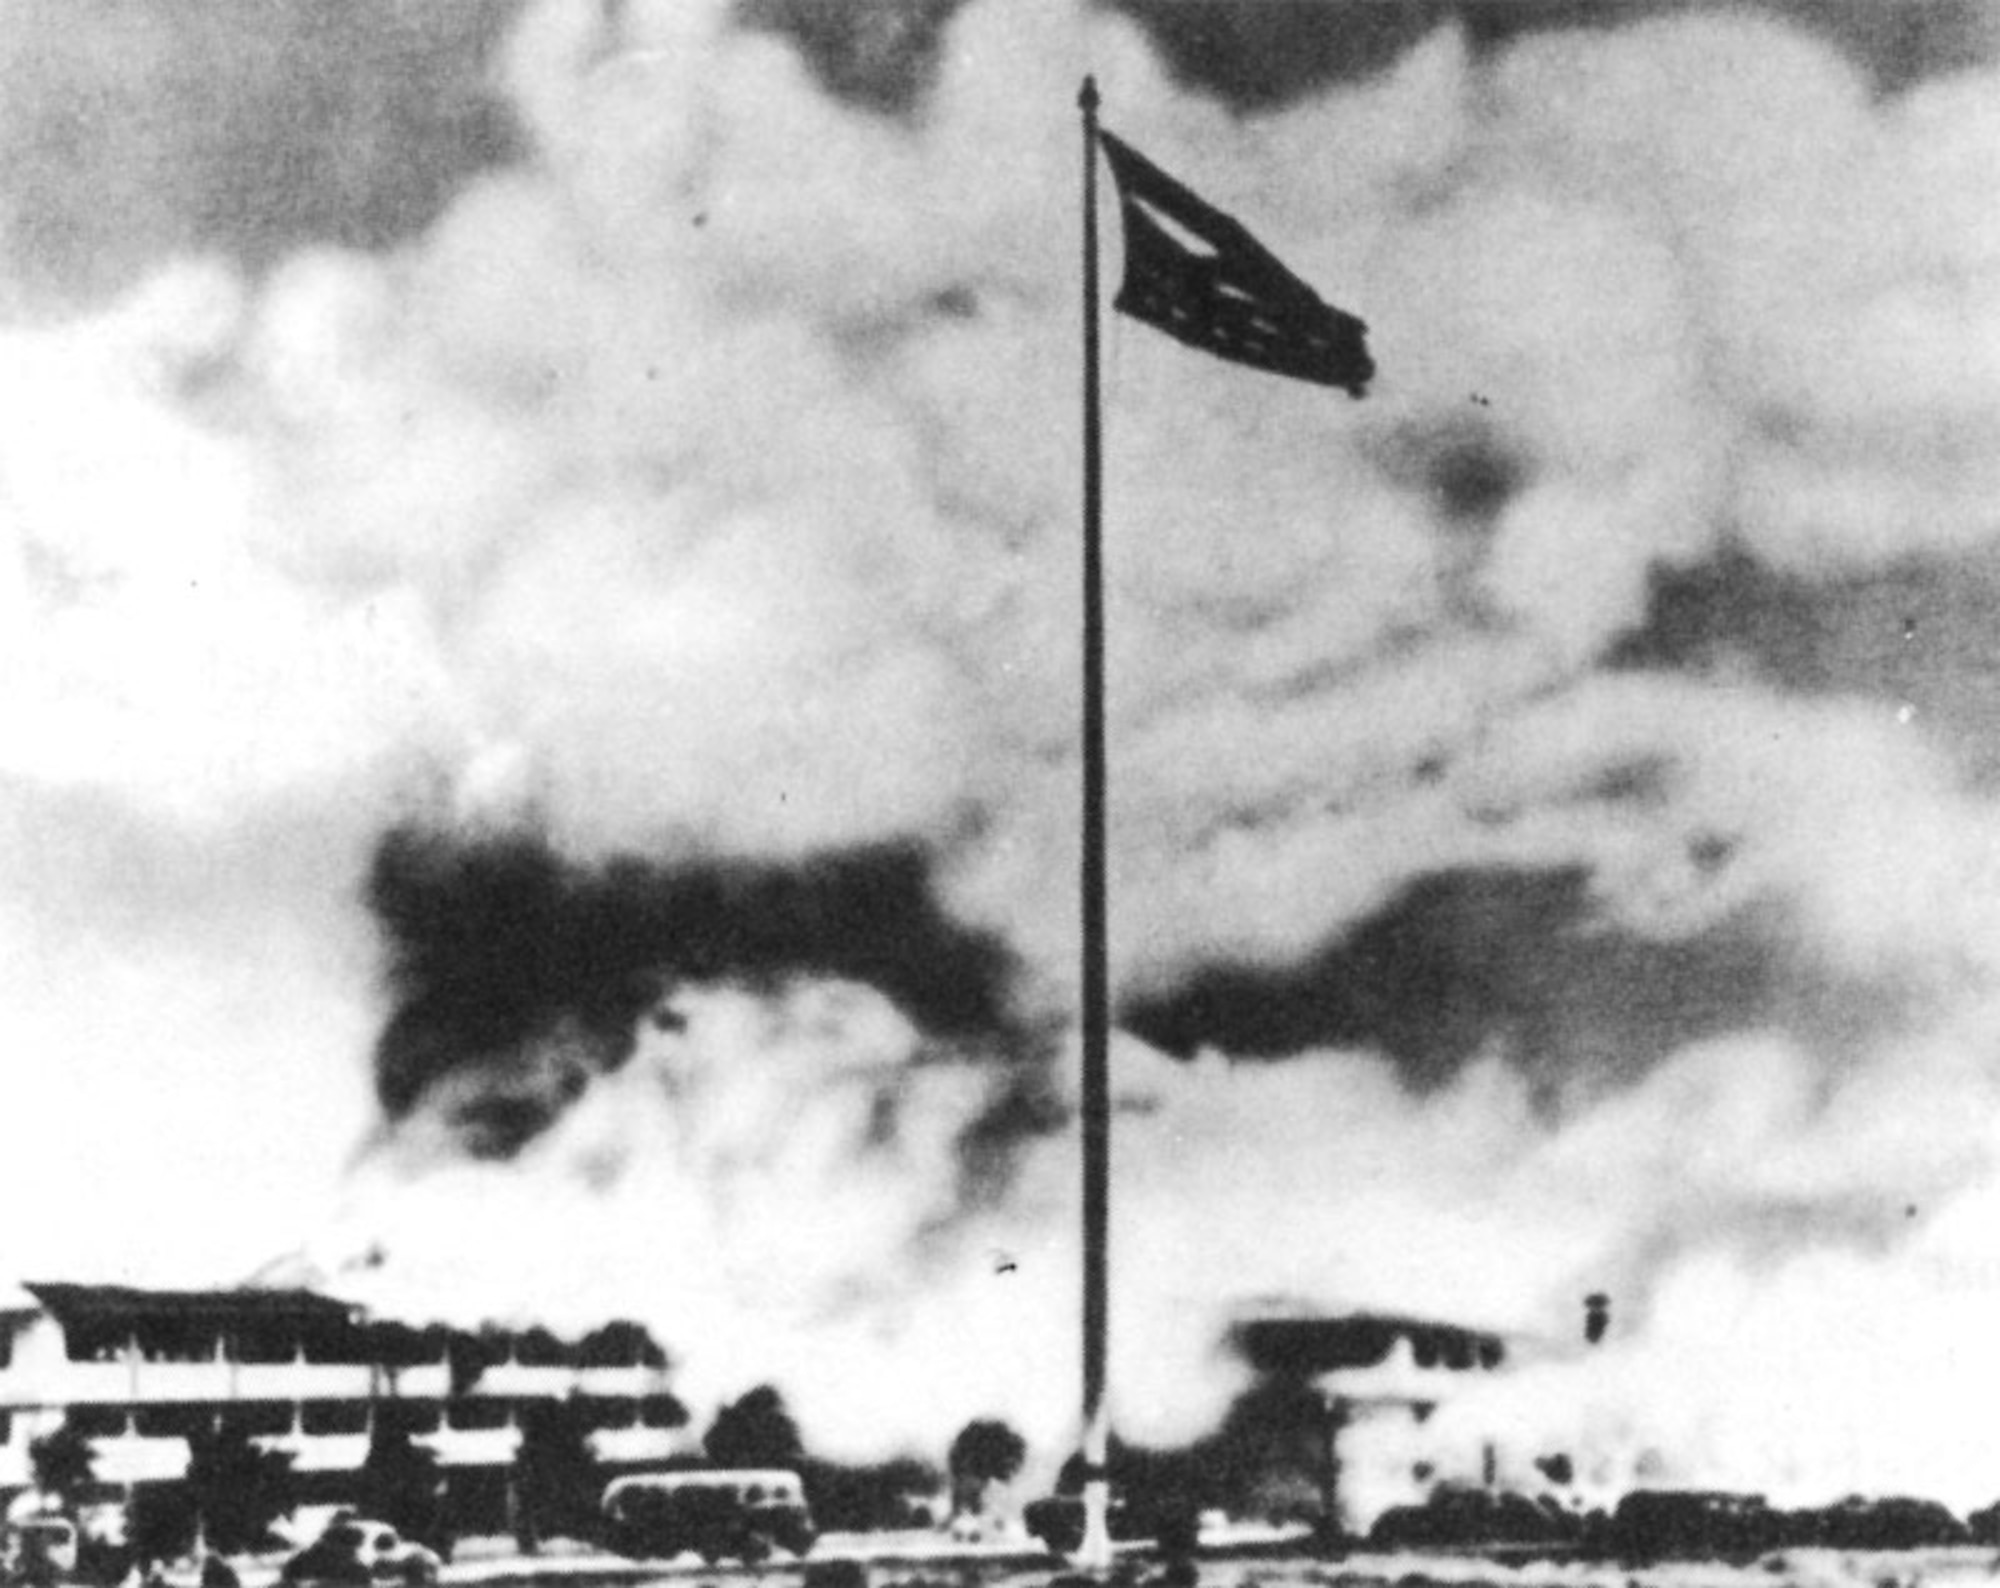 Old Glory waves over Hickam Field, bearing silent witness to the brutality of the Japanese attack Dec. 7, 1941. This same flag later flew above the United Nations charter meeting in San Francisco, over the Big Three conference at Potsdam, and above the White House Aug. 14, 1945 when the Japanese accepted terms of surrender. It was part of a historical display at the Air Force Academy until returned for permanent display at Hickam Air Force Base in 1980. (Air Force Photo)      